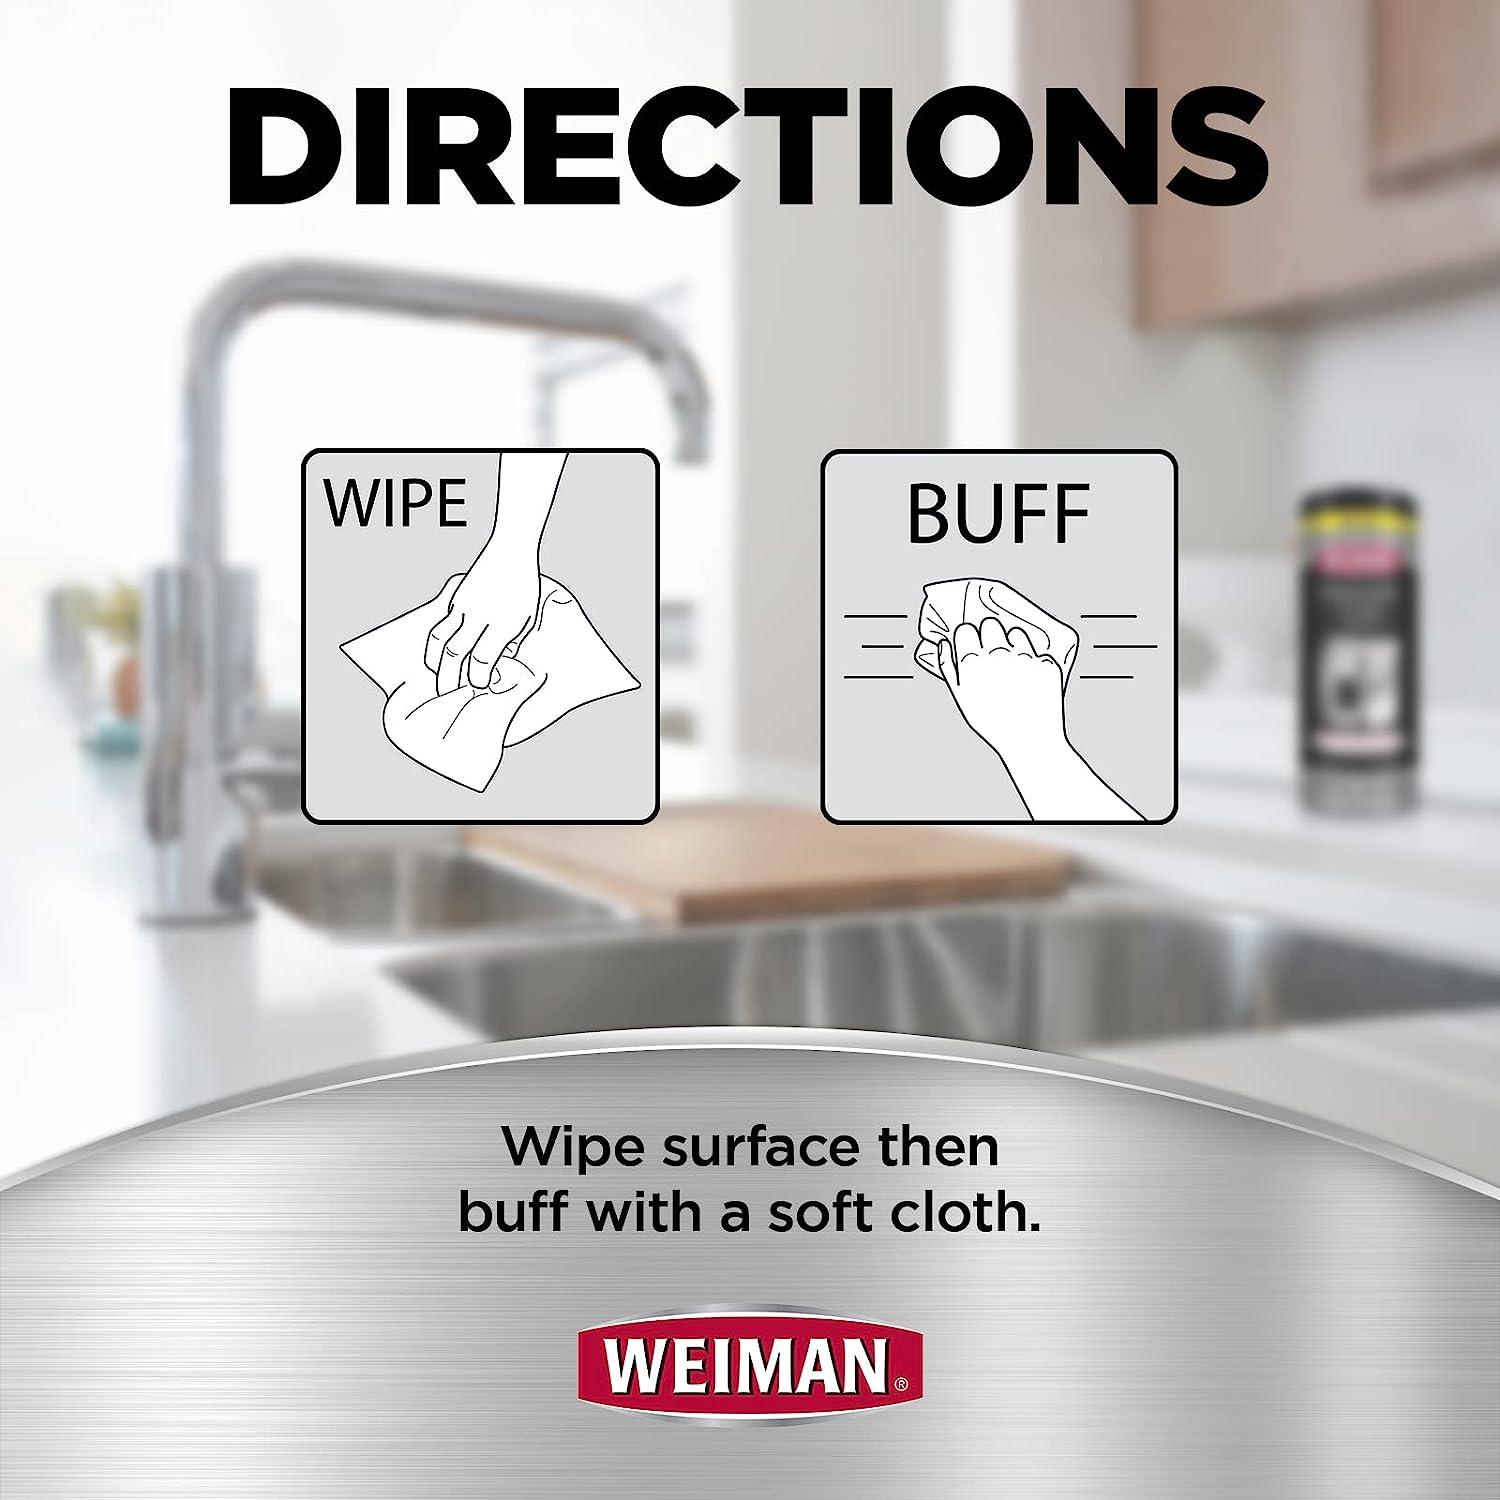 Weiman Stainless Steel Wipes 4 Pack